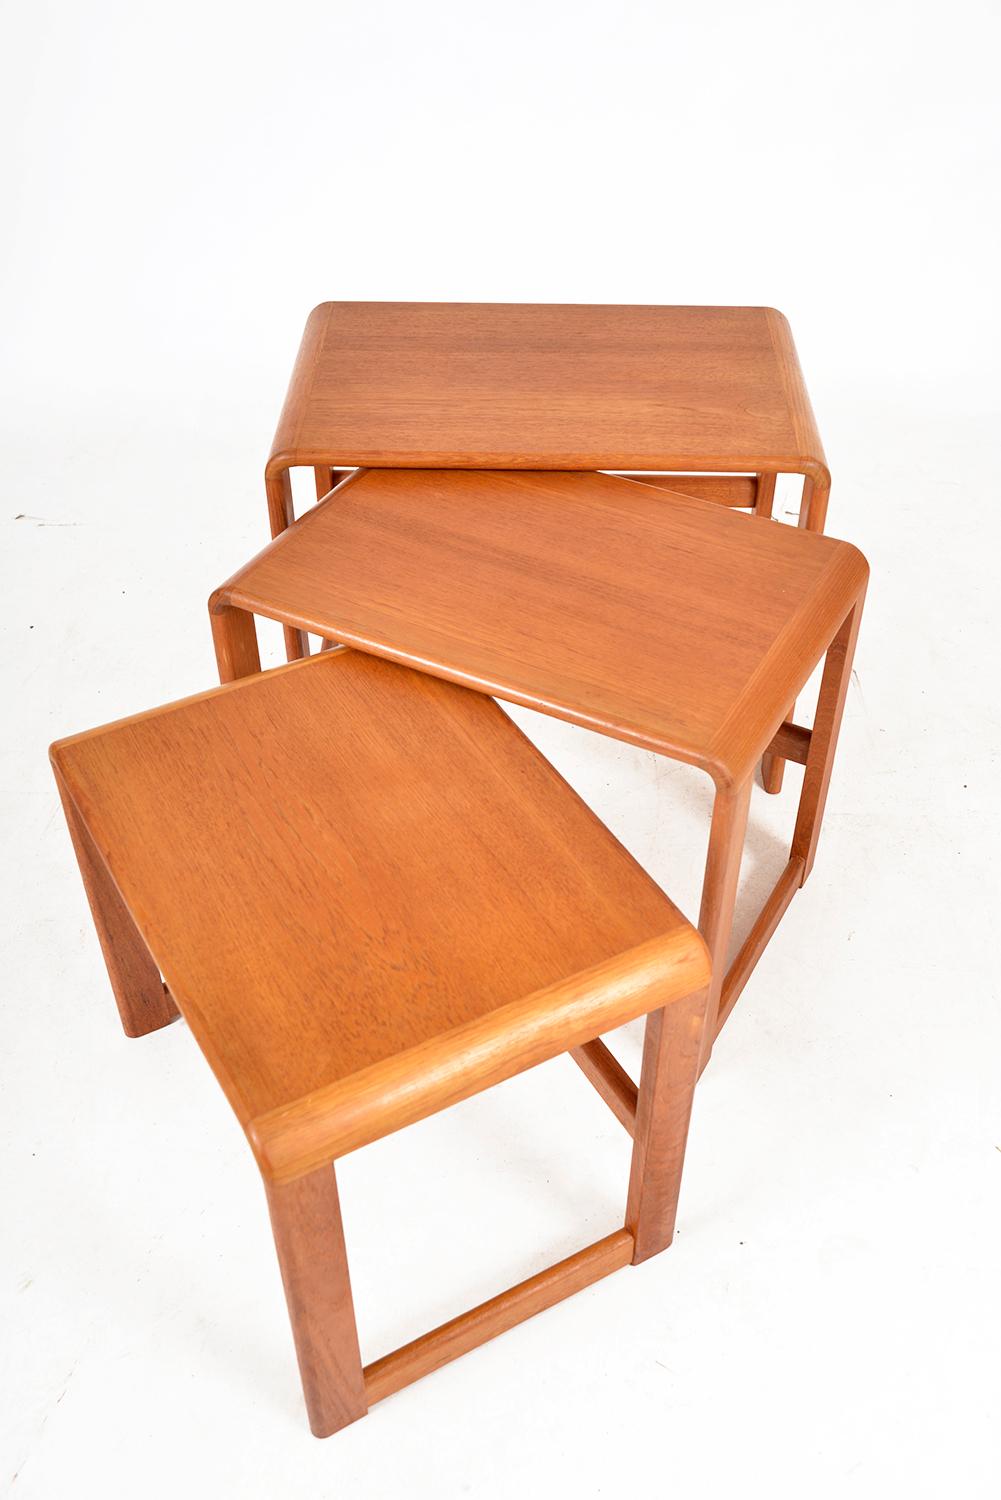 Midcentury Teak Nesting Occasional Tables by O'Donnell Design Irish 1970s Danish For Sale 8